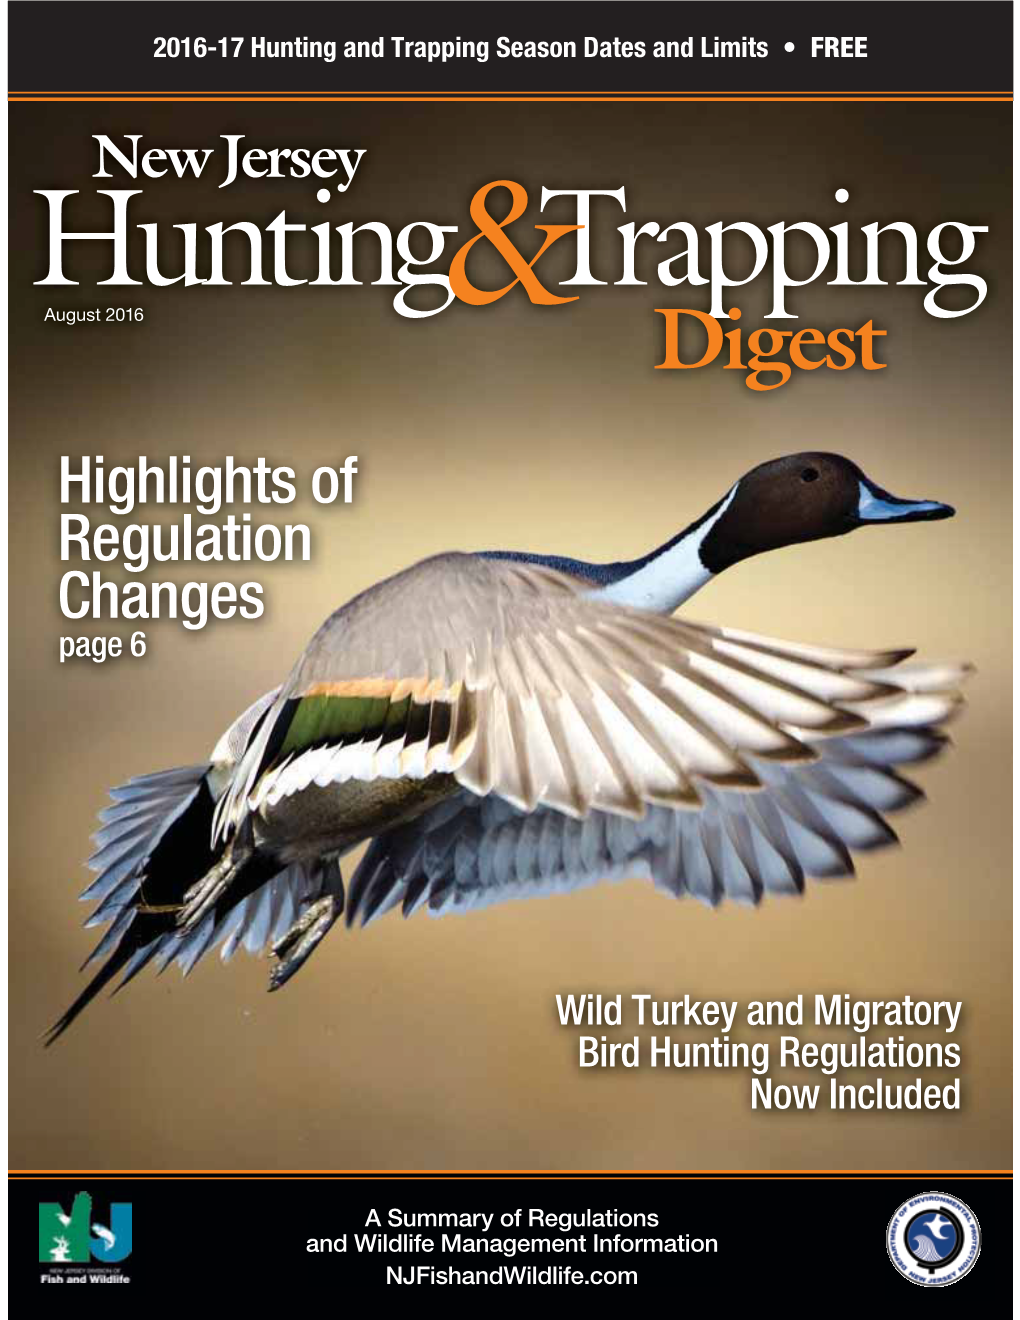 Hunting and Trapping Digest 2016